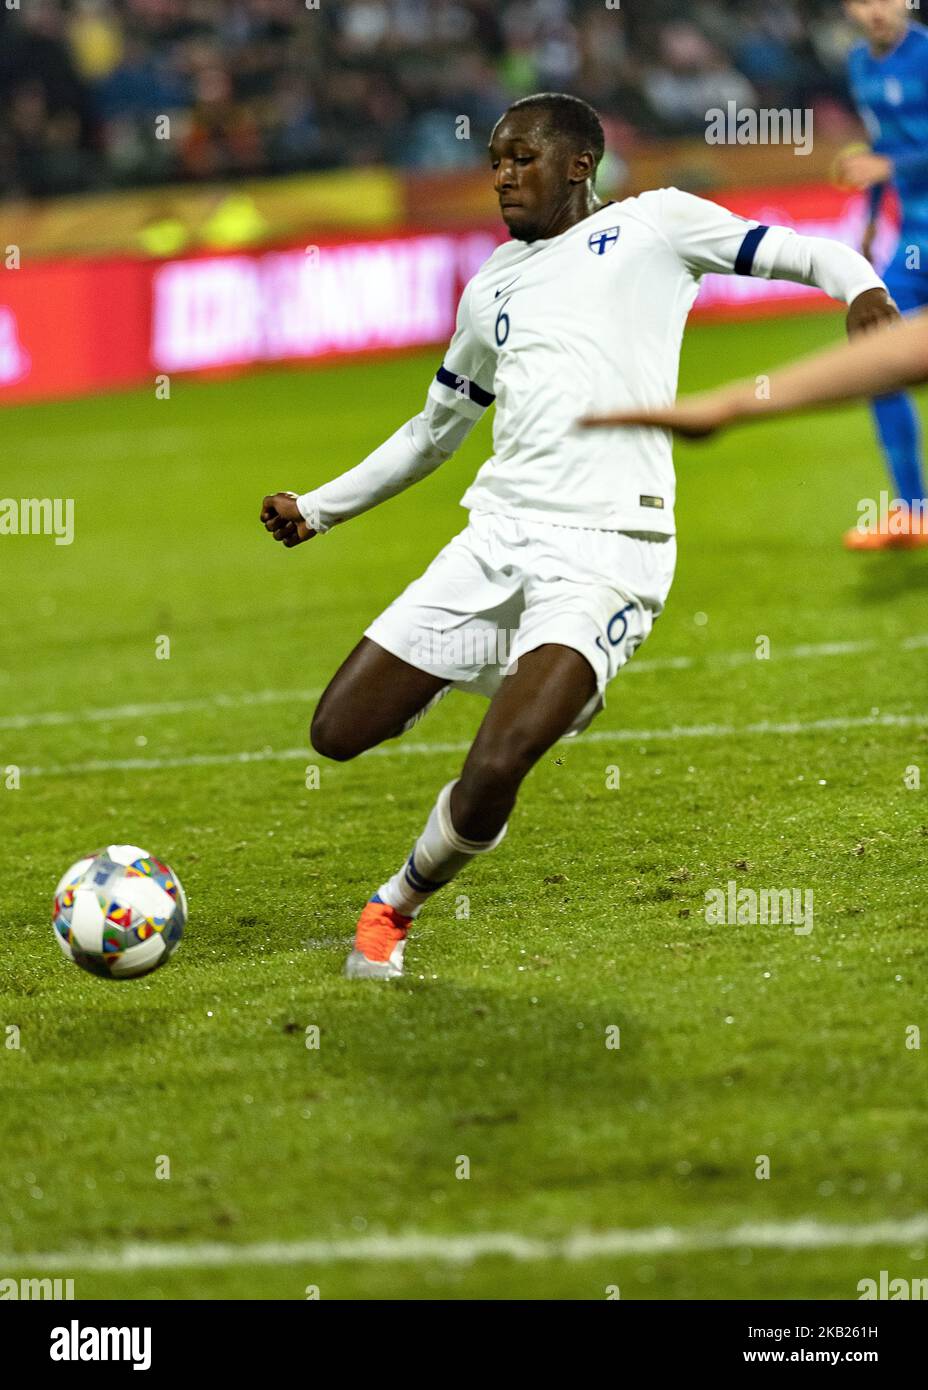 Glen Kamara of Finland during the UEFA Nations League group stage football match Finland v Grece in Tampere, Finland on October 15, 2018. (Photo by Antti Yrjonen/NurPhoto) Stock Photo